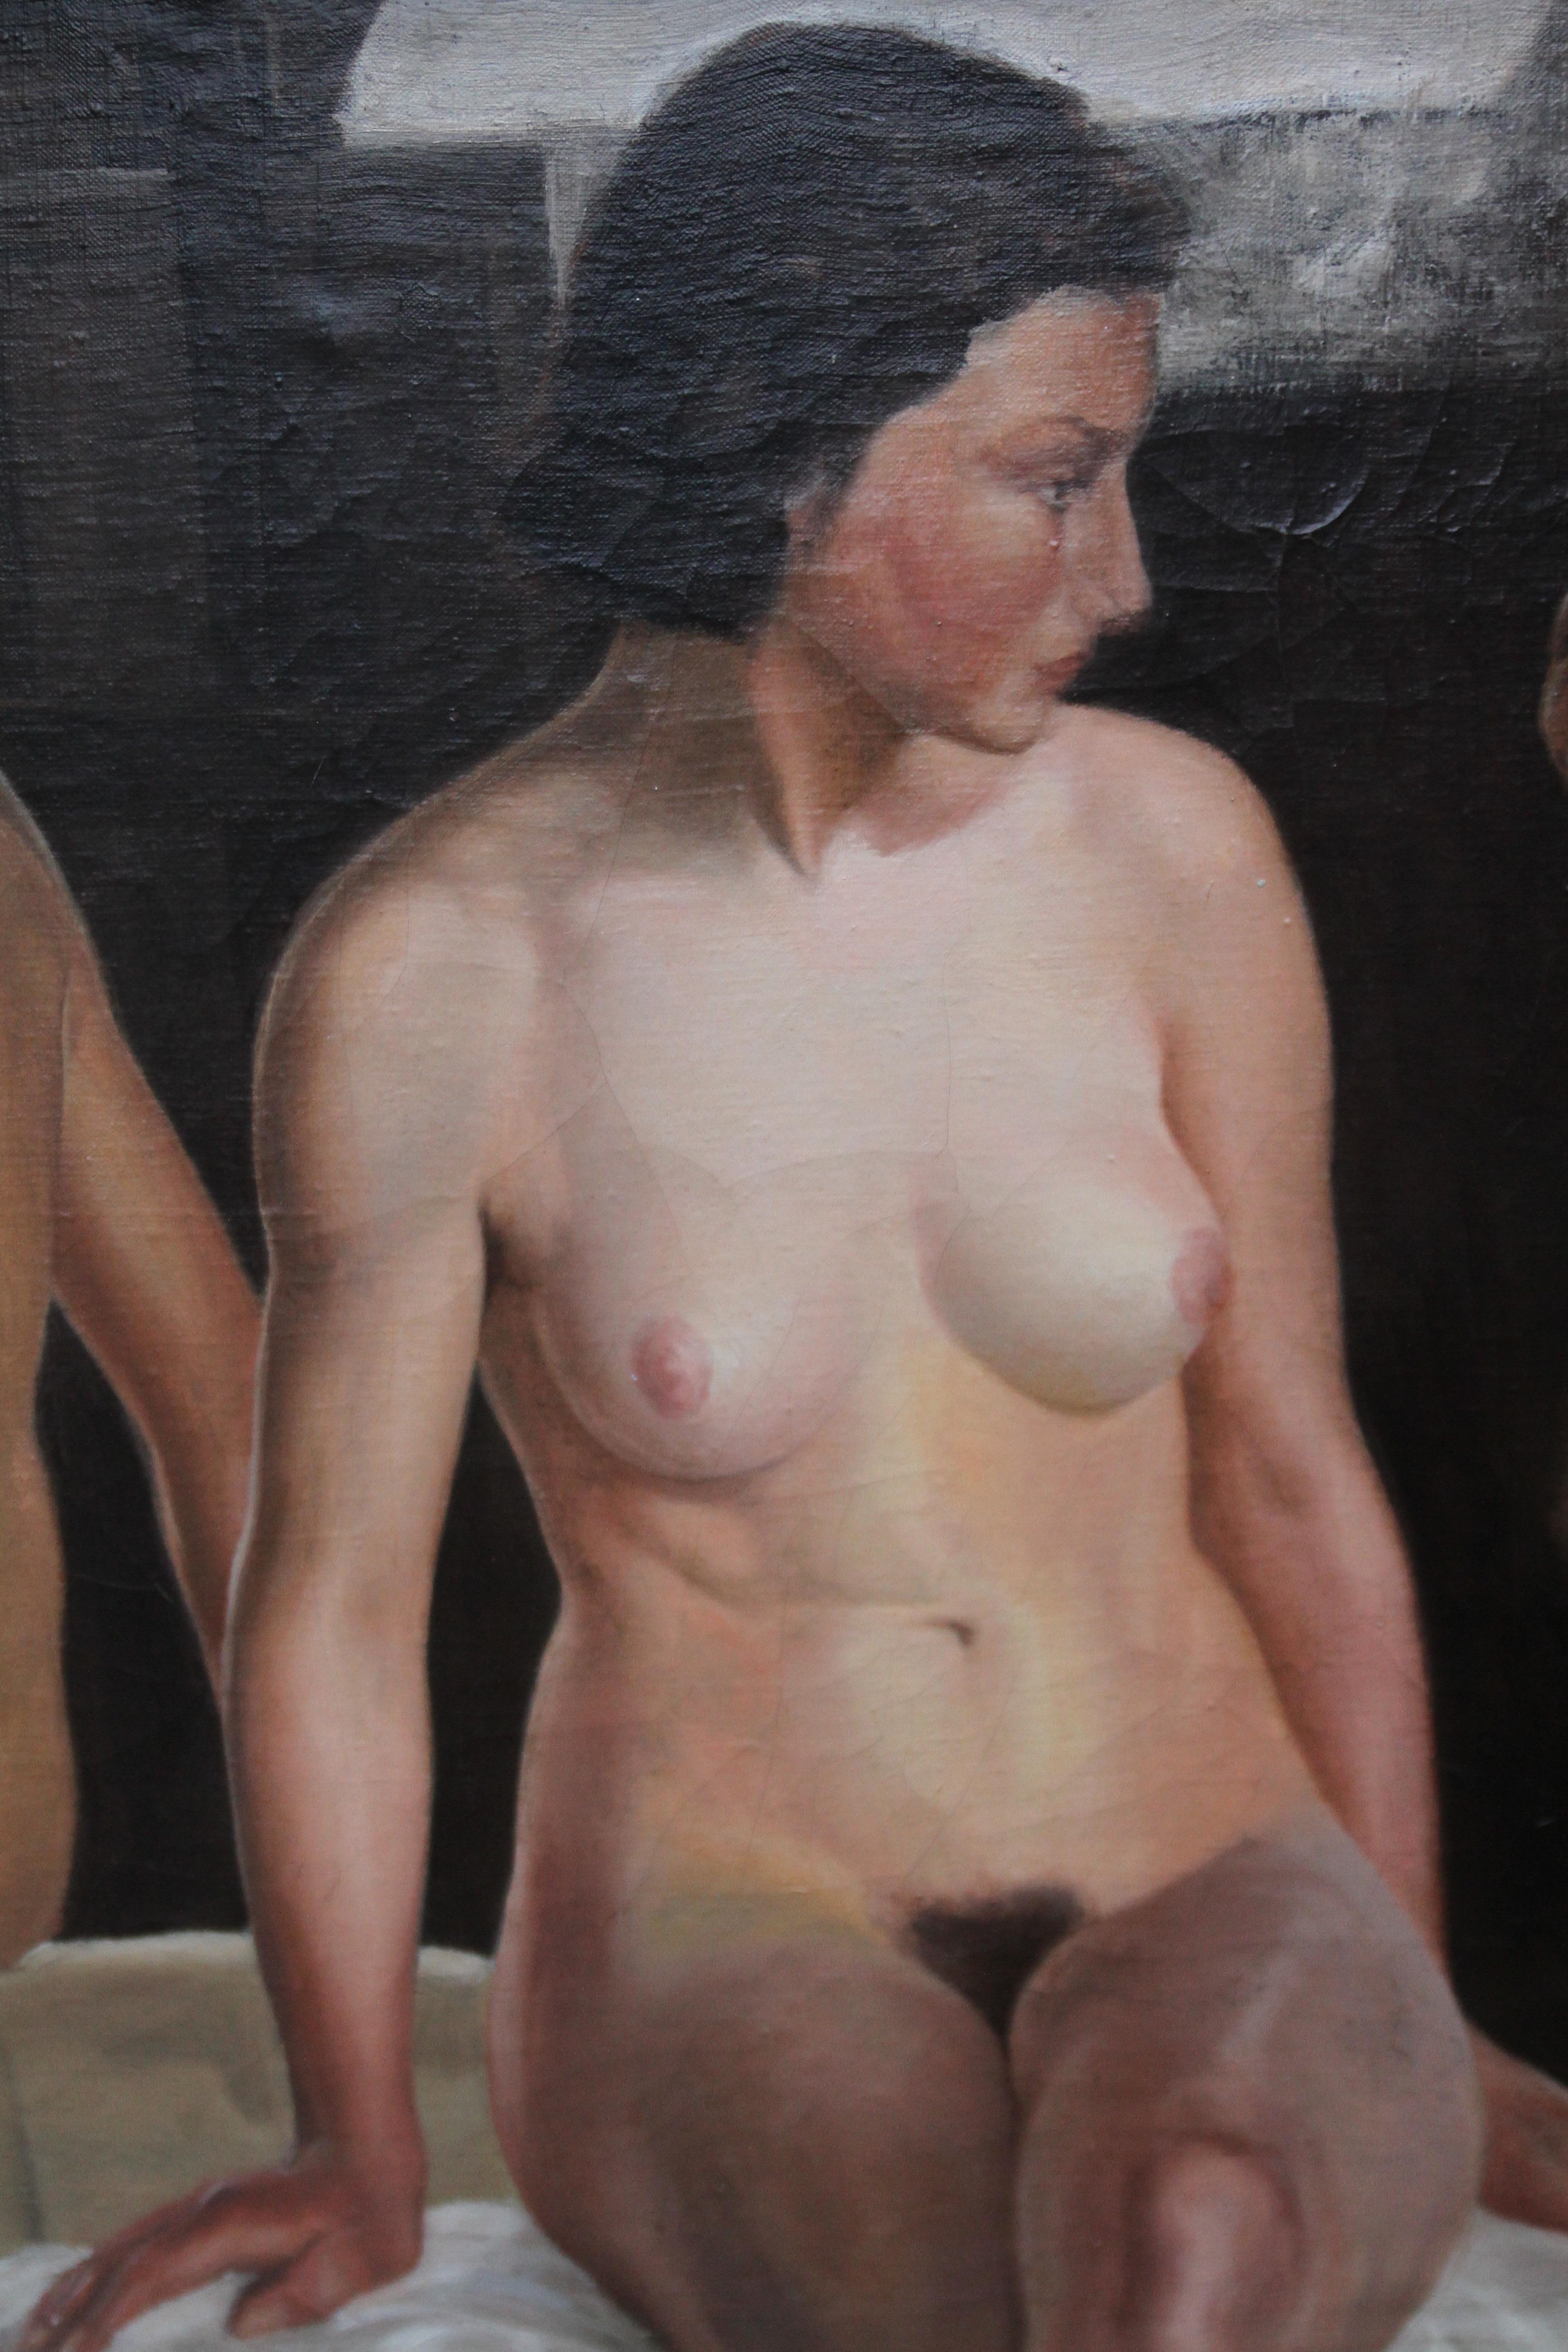 Reflected Female Nude with Artist - British Slade Sch 30's portrait oil painting - Realist Painting by Stanley Spencer (circle)